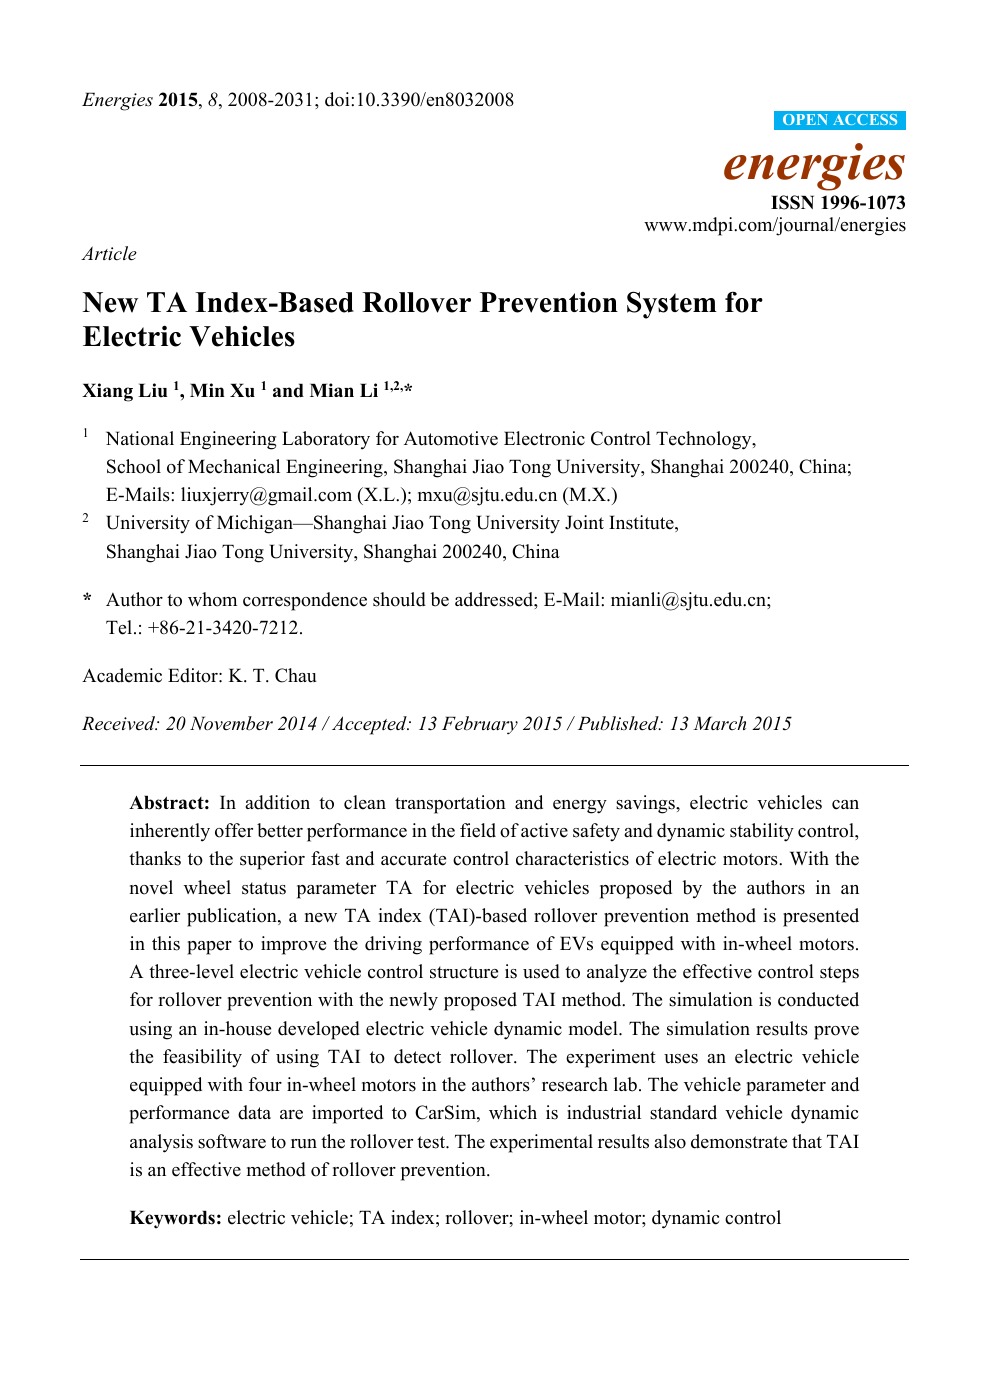 New Ta Index Based Rollover Prevention System For Electric Vehicles Topic Of Research Paper In Mechanical Engineering Download Scholarly Article Pdf And Read For Free On Cyberleninka Open Science Hub